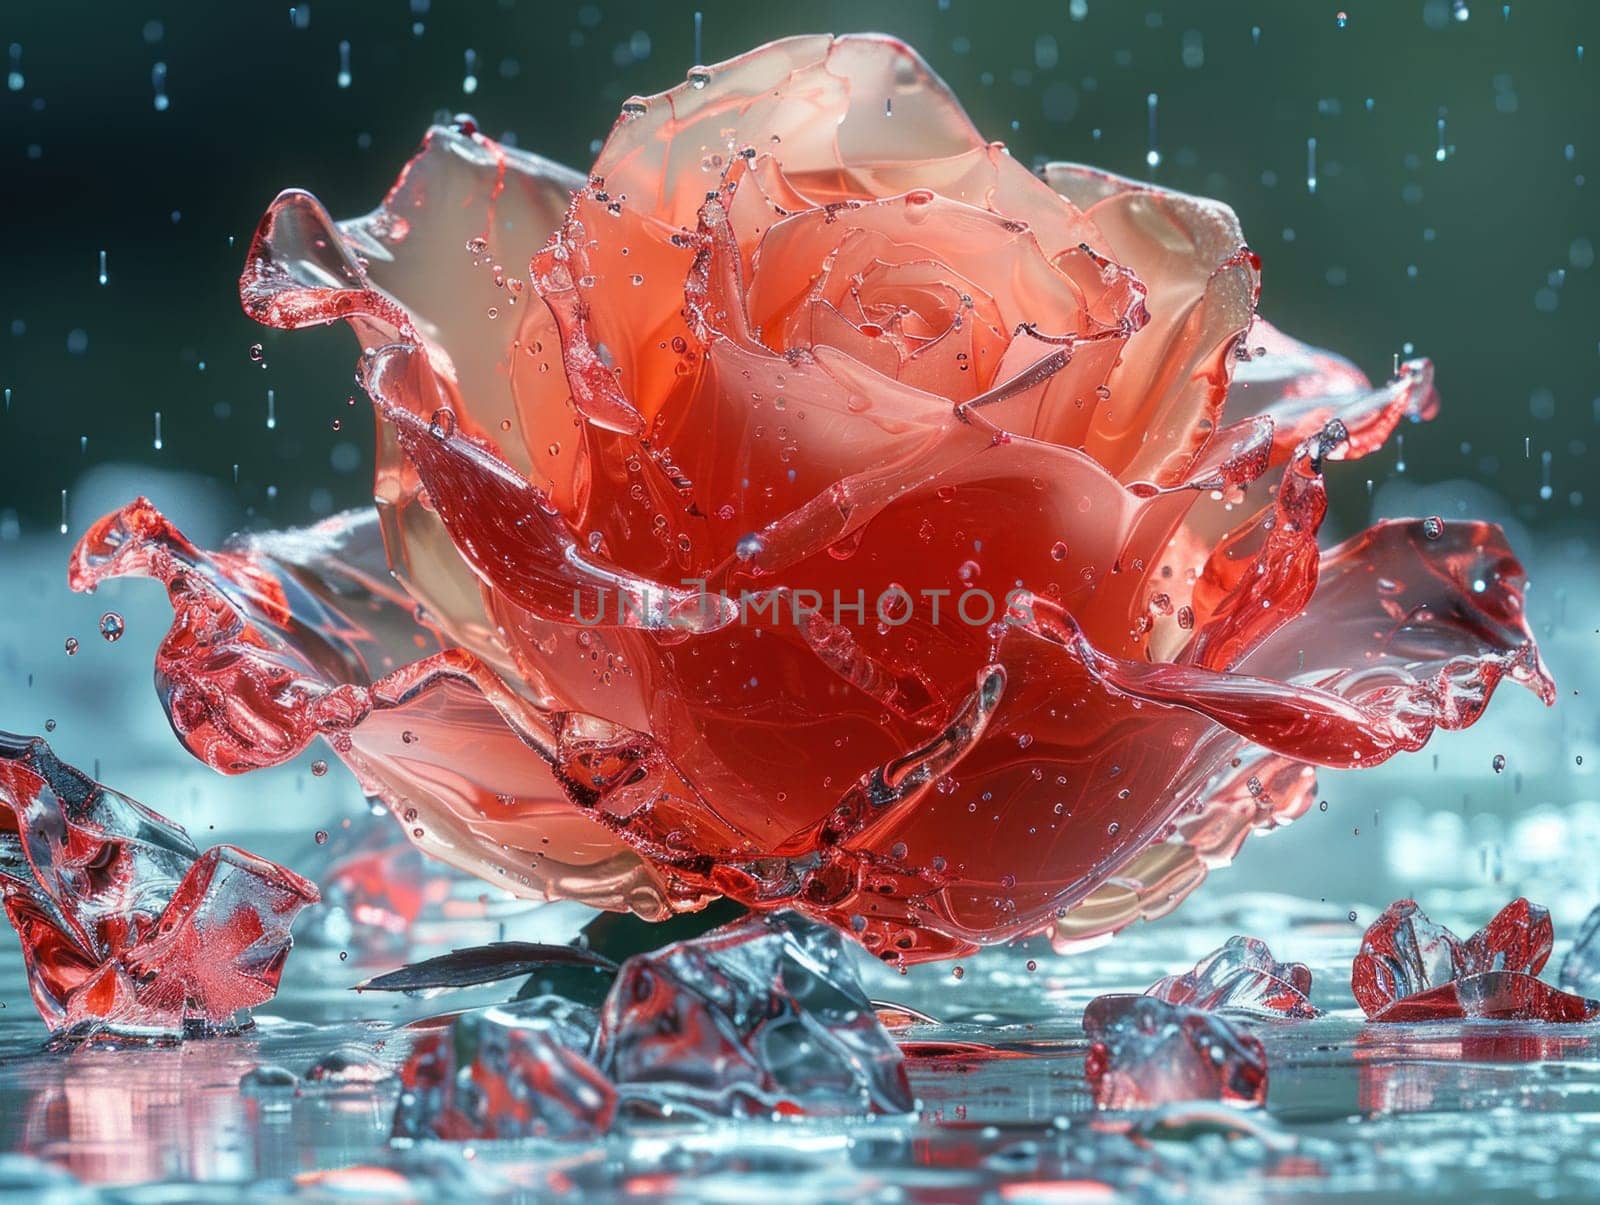 A single red rose gently rests on the surface of the water.